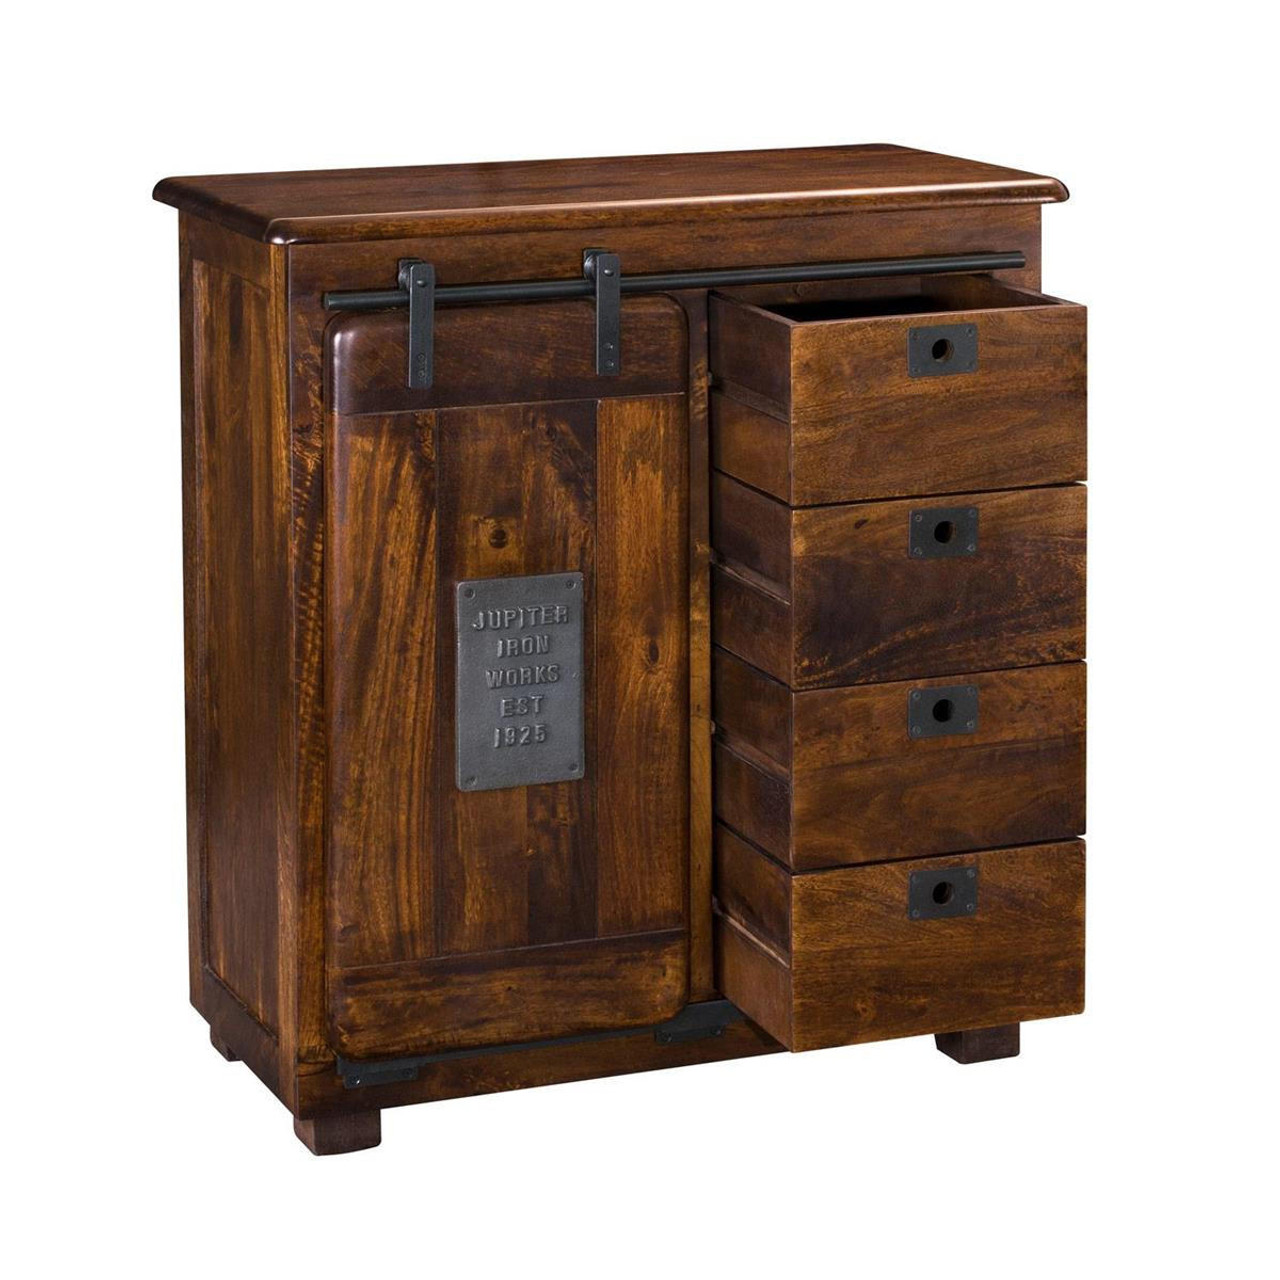 https://cdn11.bigcommerce.com/s-h75bw9lbyr/images/stencil/1280x1280/products/3153/12947/c2c-indus-rustic-small-cabinet-w-drawers__32727.1692395078.jpg?c=1